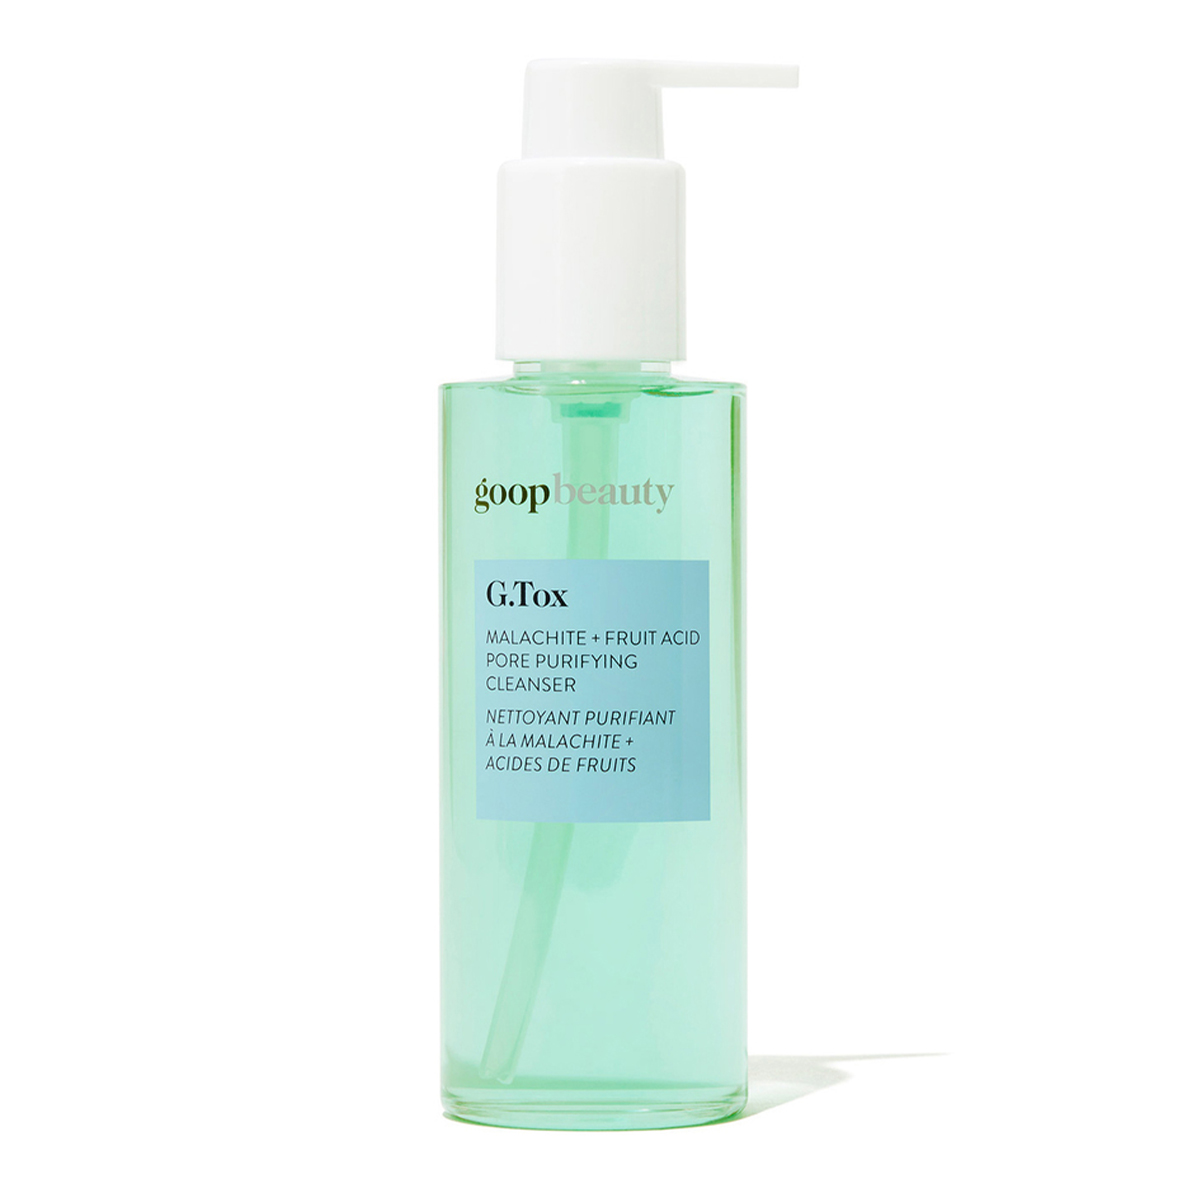 Goop Beauty G.Tox Malachite + Fruit Acid Pore Purifying Cleanser